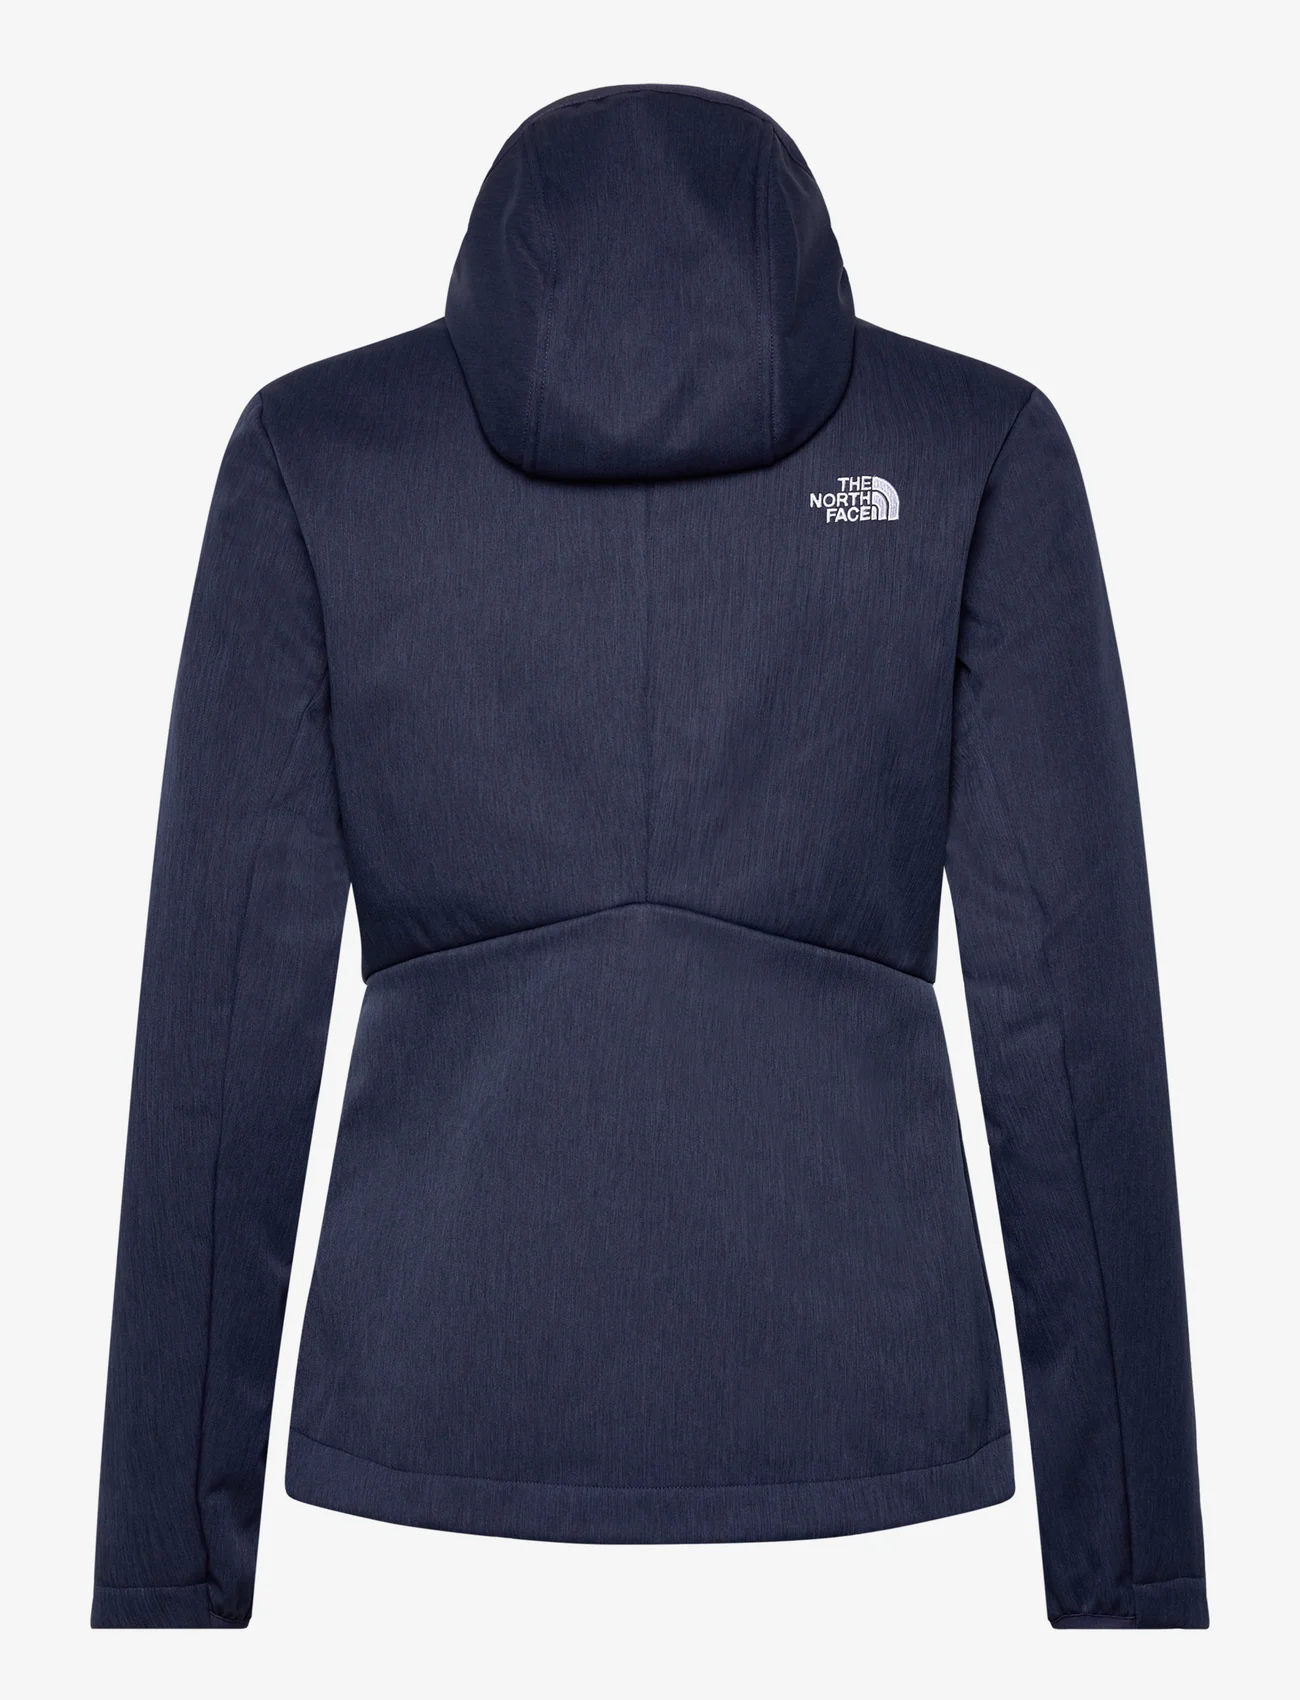 The North Face - W QUEST HIGHLOFT SOFT SHELL JACKET - EU - windbreakers - summit navy heather - 1